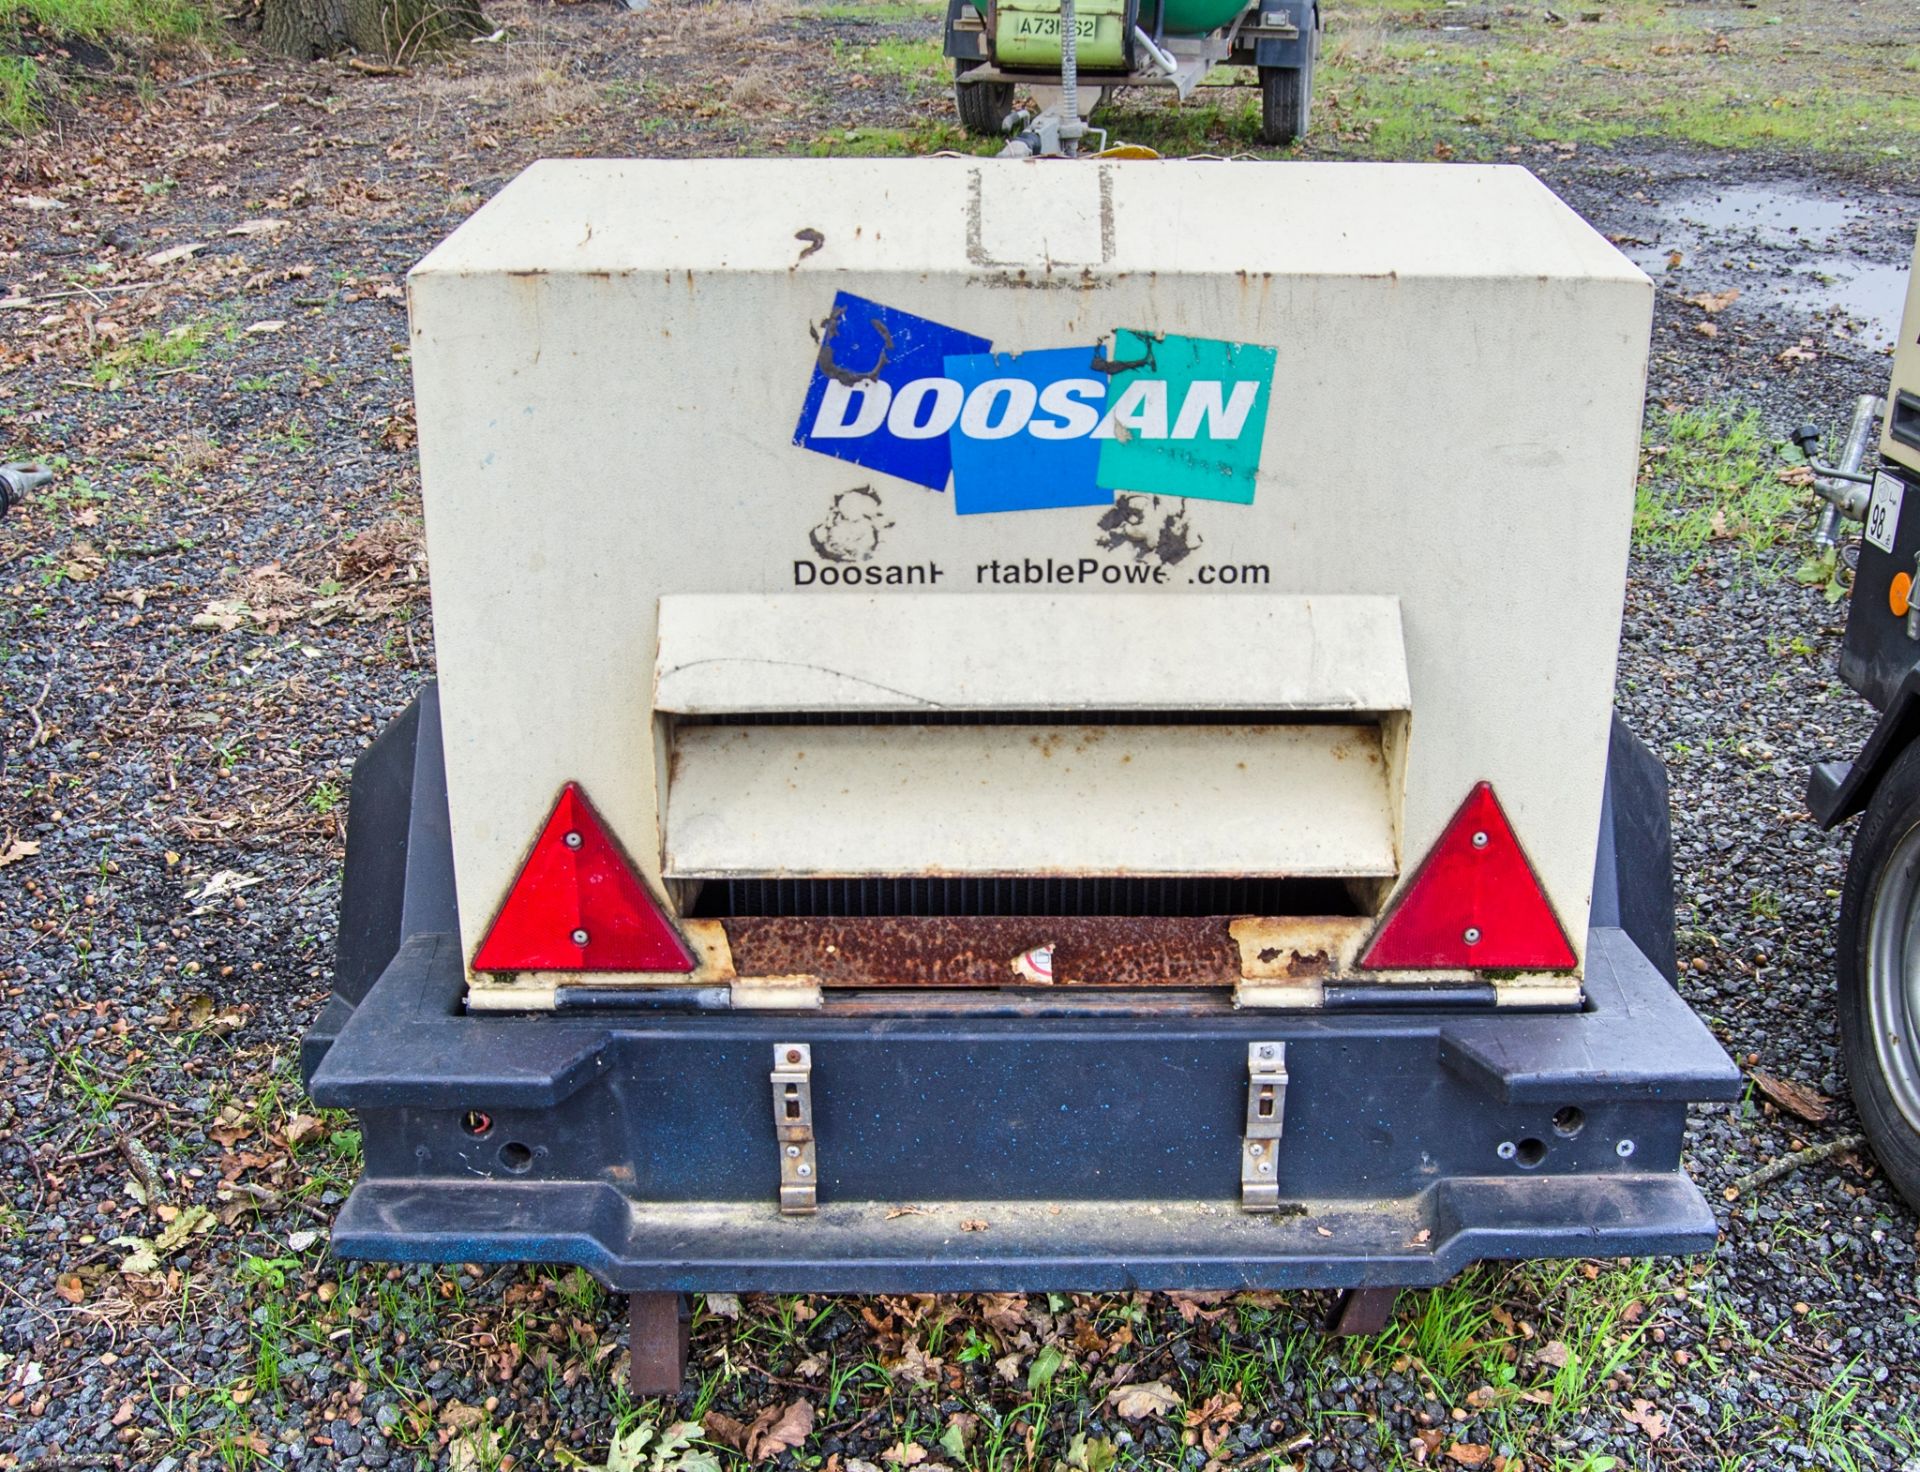 Doosan 720 diesel driven fast tow air compressor Year: 2012 S/N: 123292 Recorded Hours: 542 - Image 4 of 7